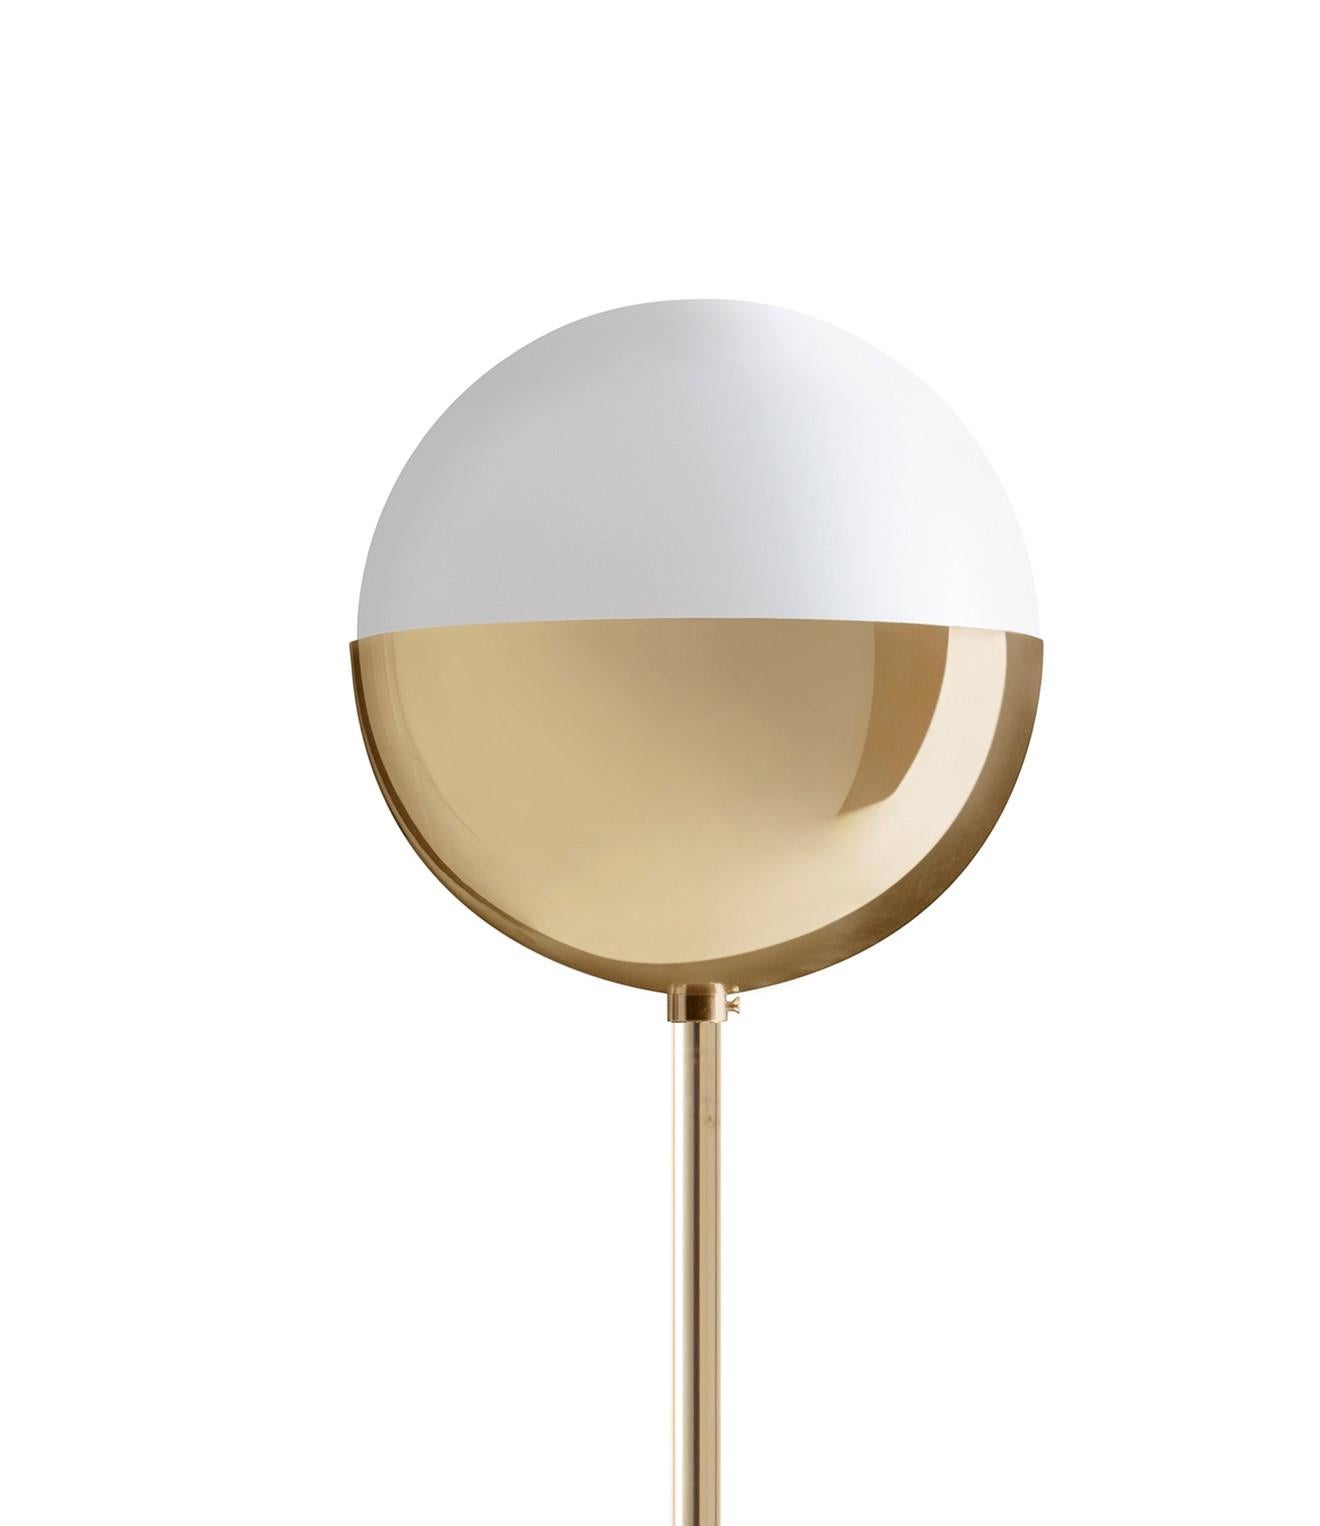 Brass floor lamp 01 by Magic Circus Editions
Dimensions: D 25 x H 160 cm
Materials: Brass base, smooth brass tube, glossy mouth blown glass
Dimmable version available.


Rethinking, reimagining, redesigning familiar objects that we look at